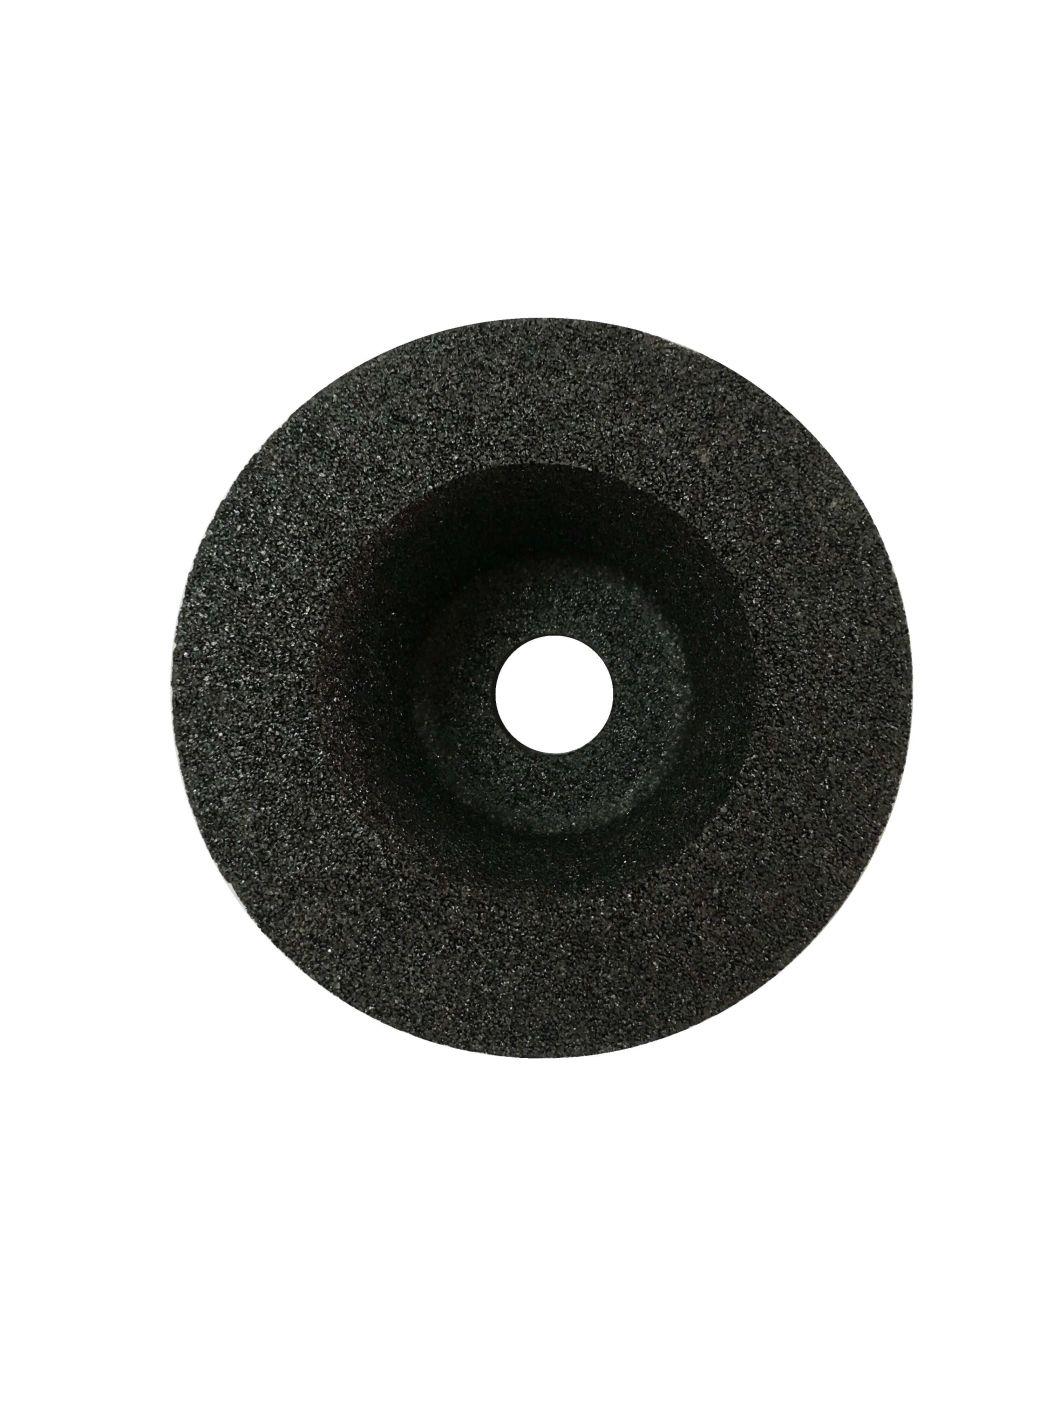 110mmx55mmxm14 Resin Bonded Cup Stone